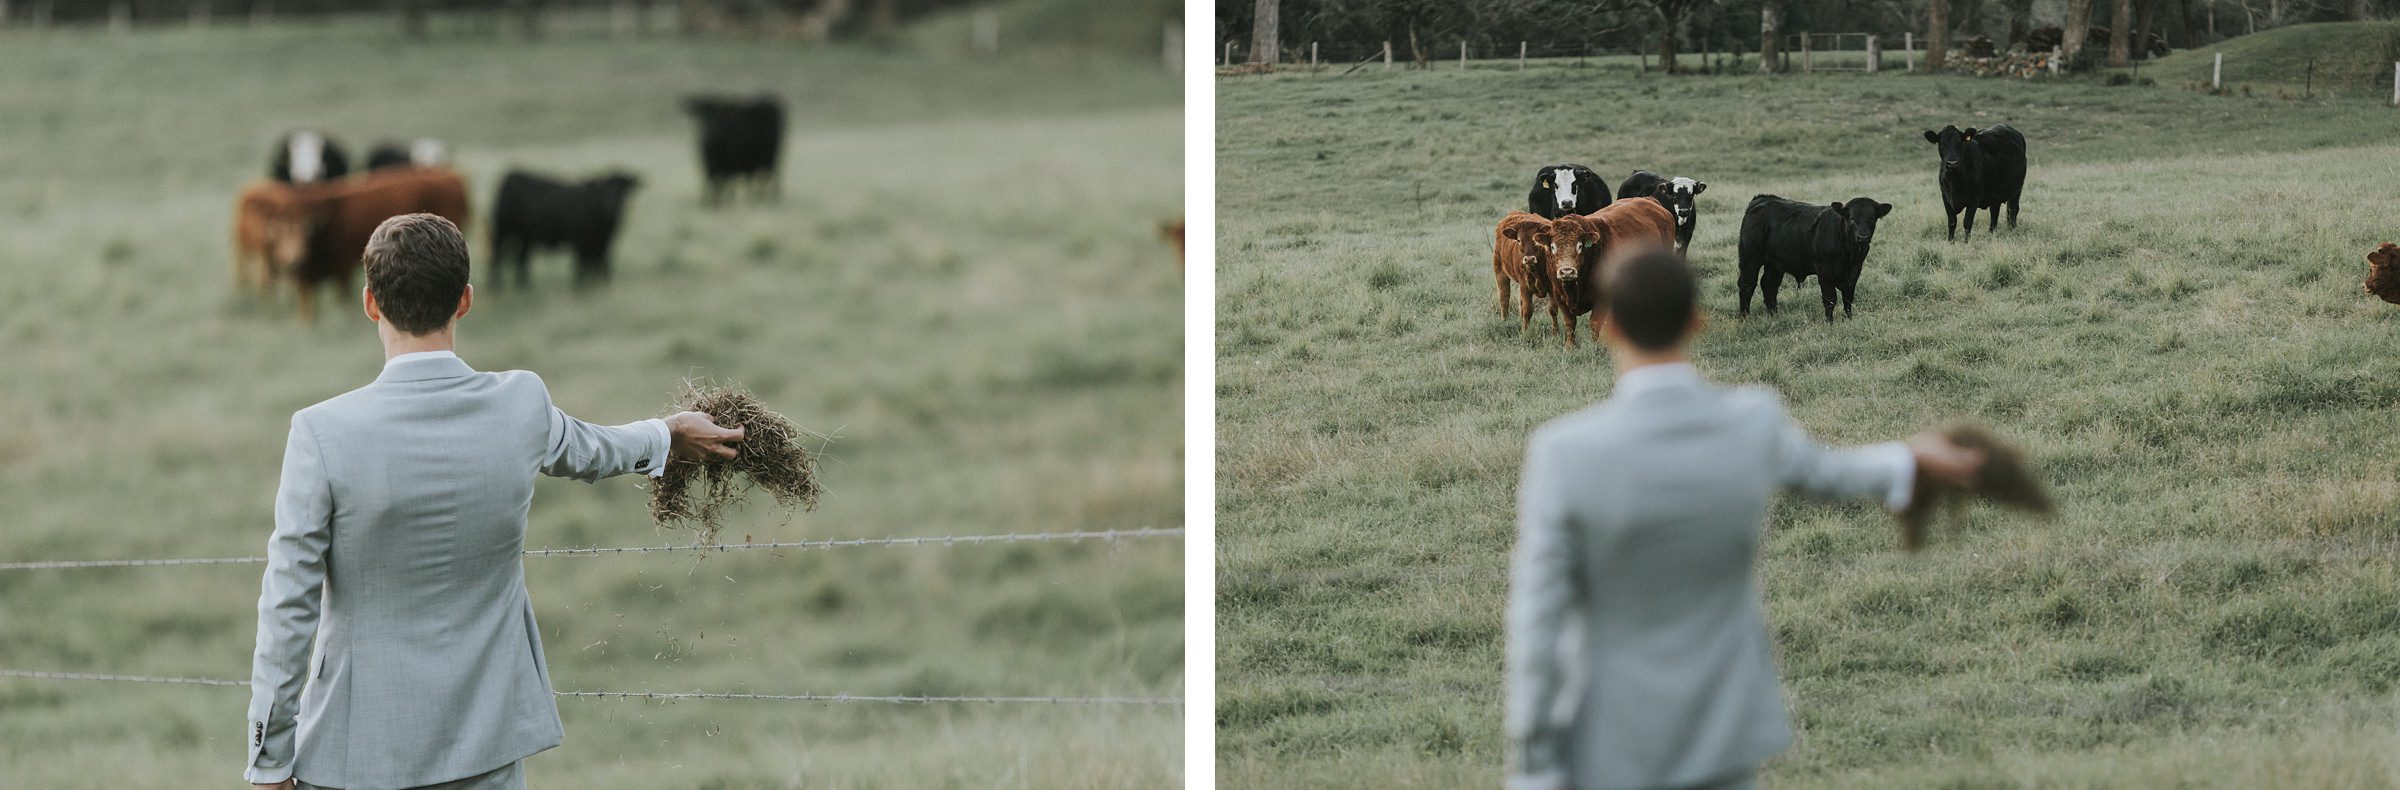 groom attempts to feed the cattle on his wedding day